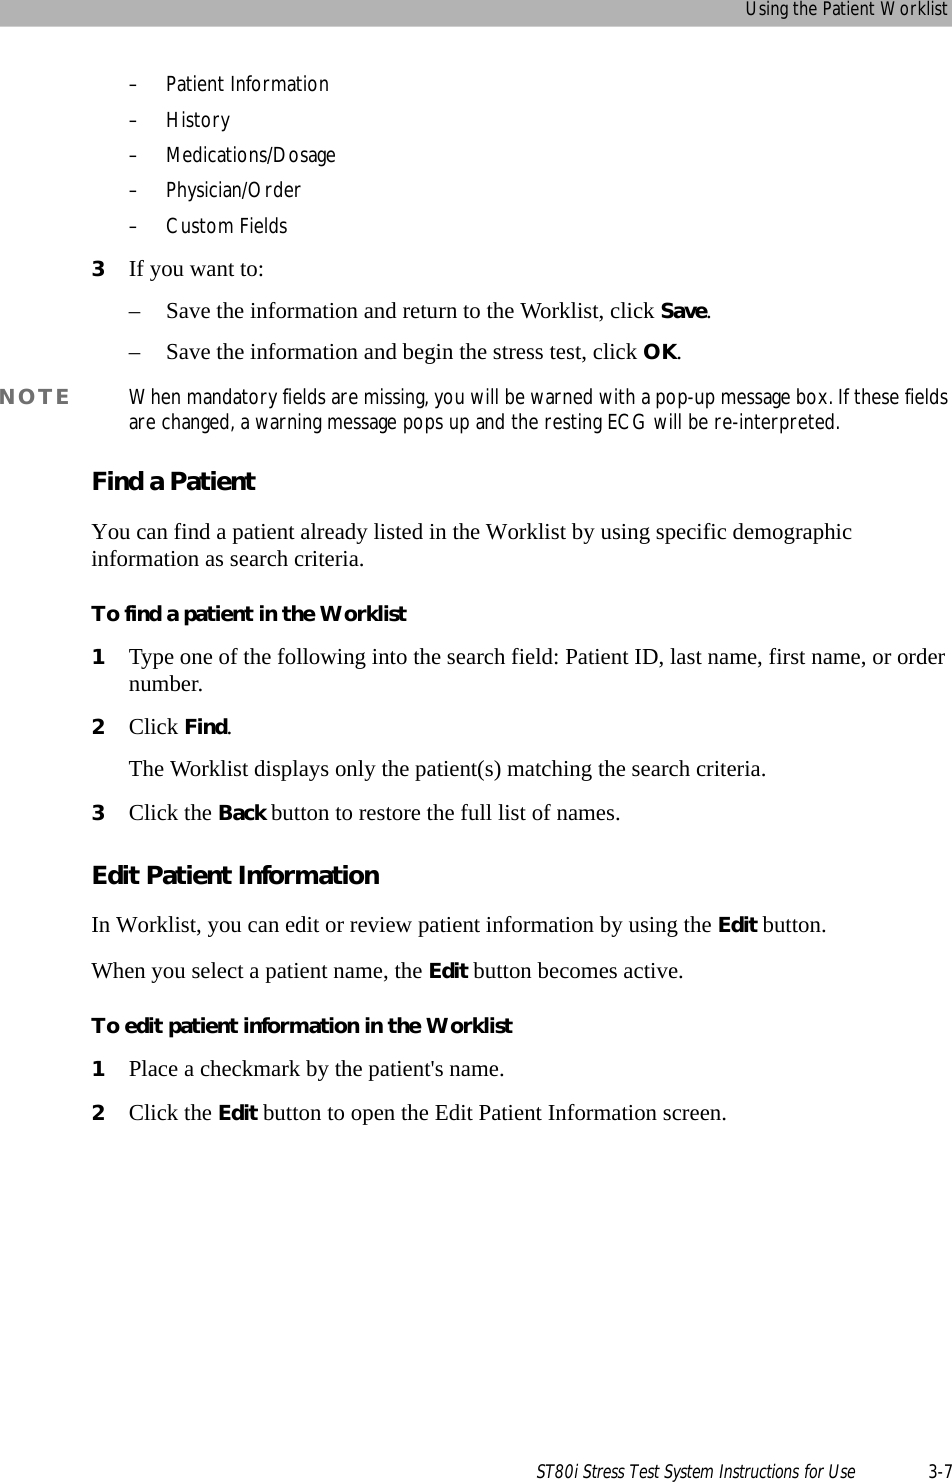 Using the Patient WorklistST80i Stress Test System Instructions for Use 3-7– Patient Information–History– Medications/Dosage–Physician/Order–Custom Fields3If you want to:– Save the information and return to the Worklist, click Save.– Save the information and begin the stress test, click OK.NOTE When mandatory fields are missing, you will be warned with a pop-up message box. If these fields are changed, a warning message pops up and the resting ECG will be re-interpreted.Find a PatientYou can find a patient already listed in the Worklist by using specific demographic information as search criteria.To find a patient in the Worklist1Type one of the following into the search field: Patient ID, last name, first name, or order number.2Click Find.The Worklist displays only the patient(s) matching the search criteria.3Click the Back button to restore the full list of names.Edit Patient InformationIn Worklist, you can edit or review patient information by using the Edit button.When you select a patient name, the Edit button becomes active. To edit patient information in the Worklist1Place a checkmark by the patient&apos;s name.2Click the Edit button to open the Edit Patient Information screen.